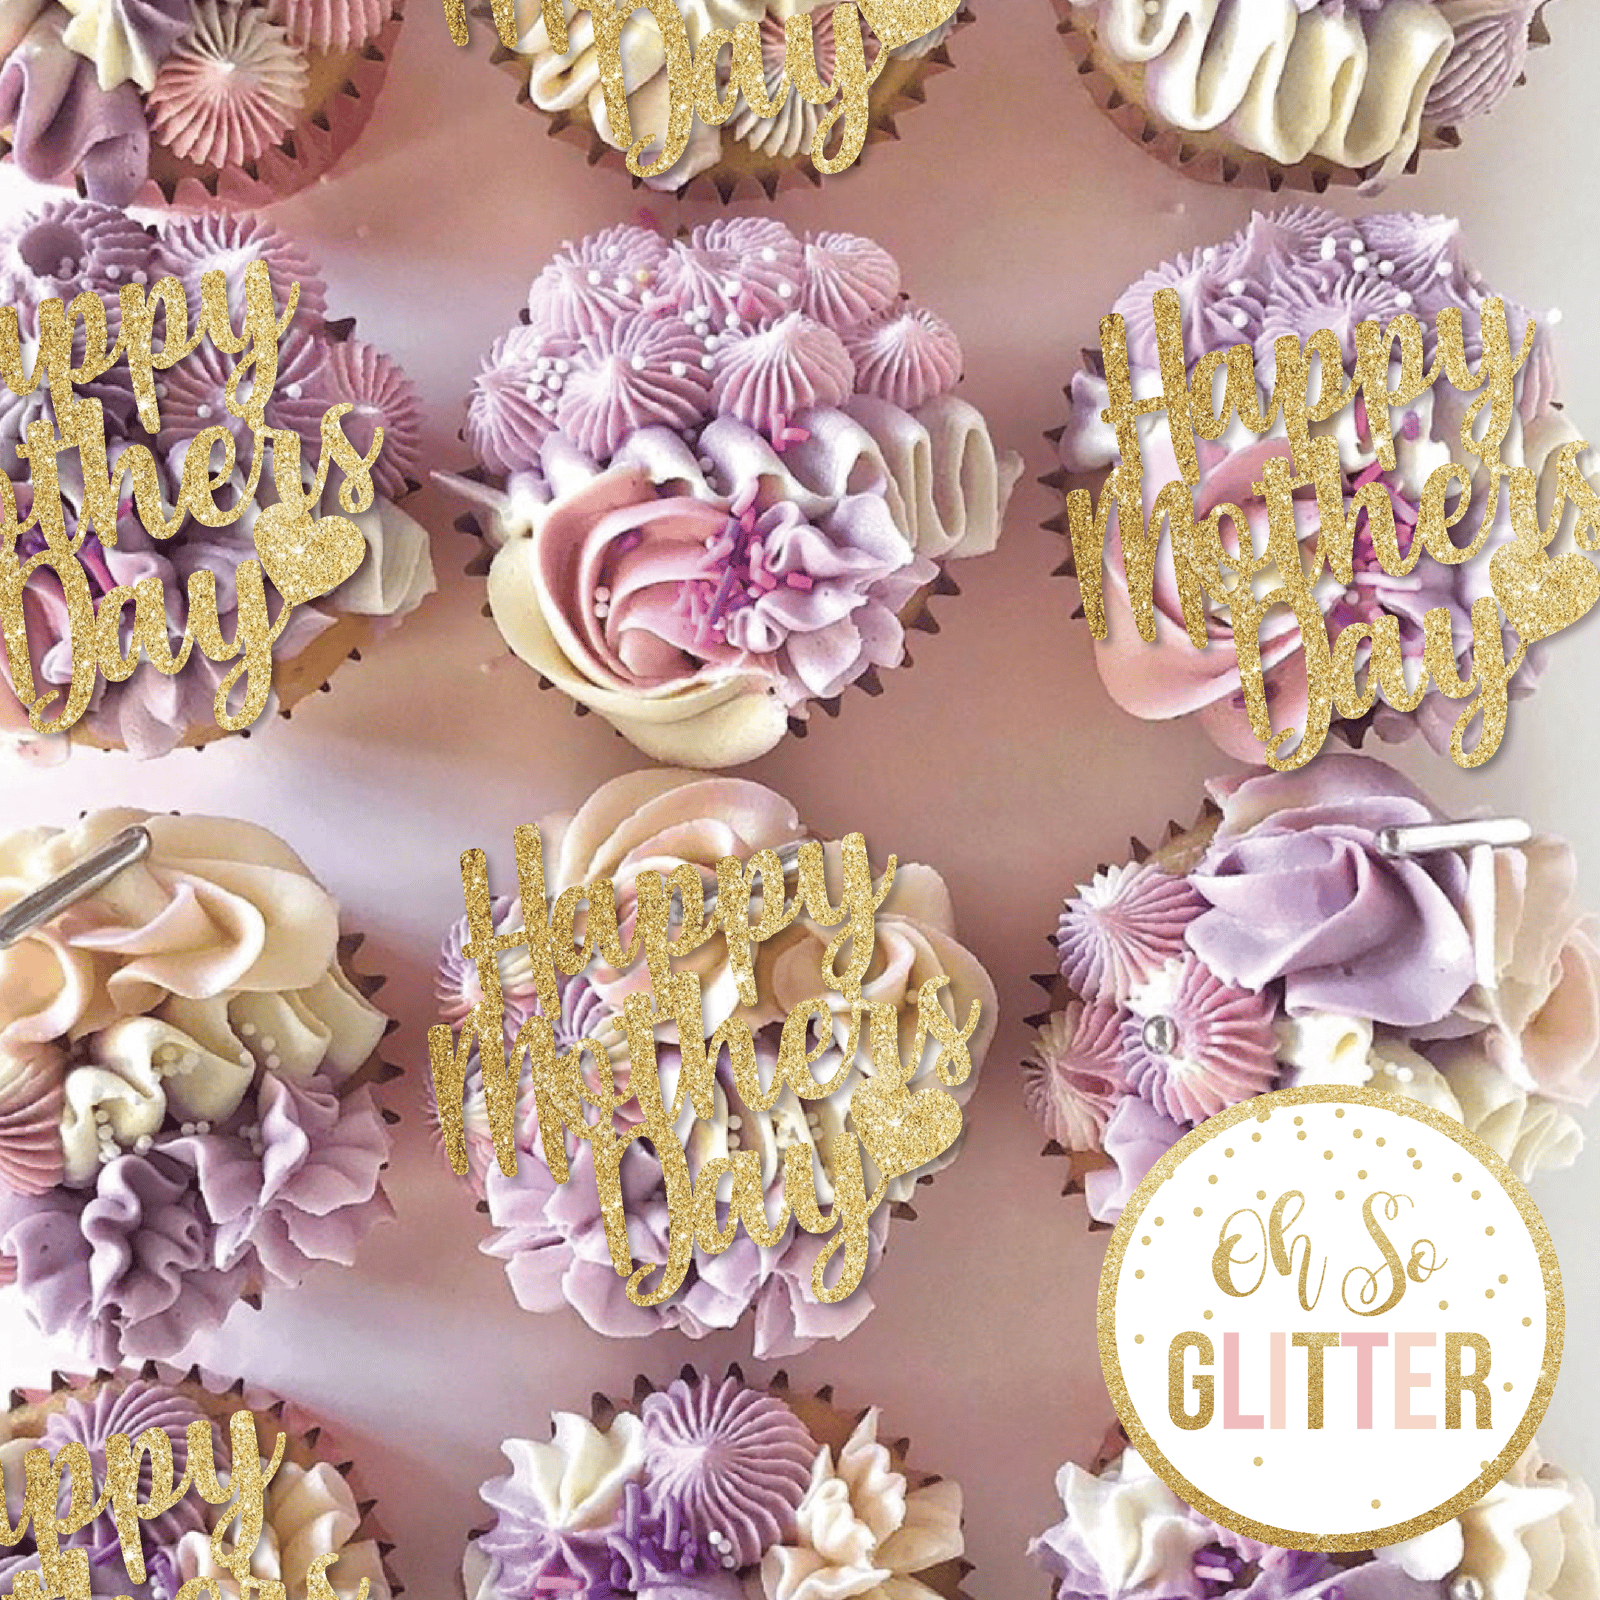 15-45 Mothers Day Flowers  EDIBLE WAFER CUP CAKE TOPPERS BEAUTIFUL 